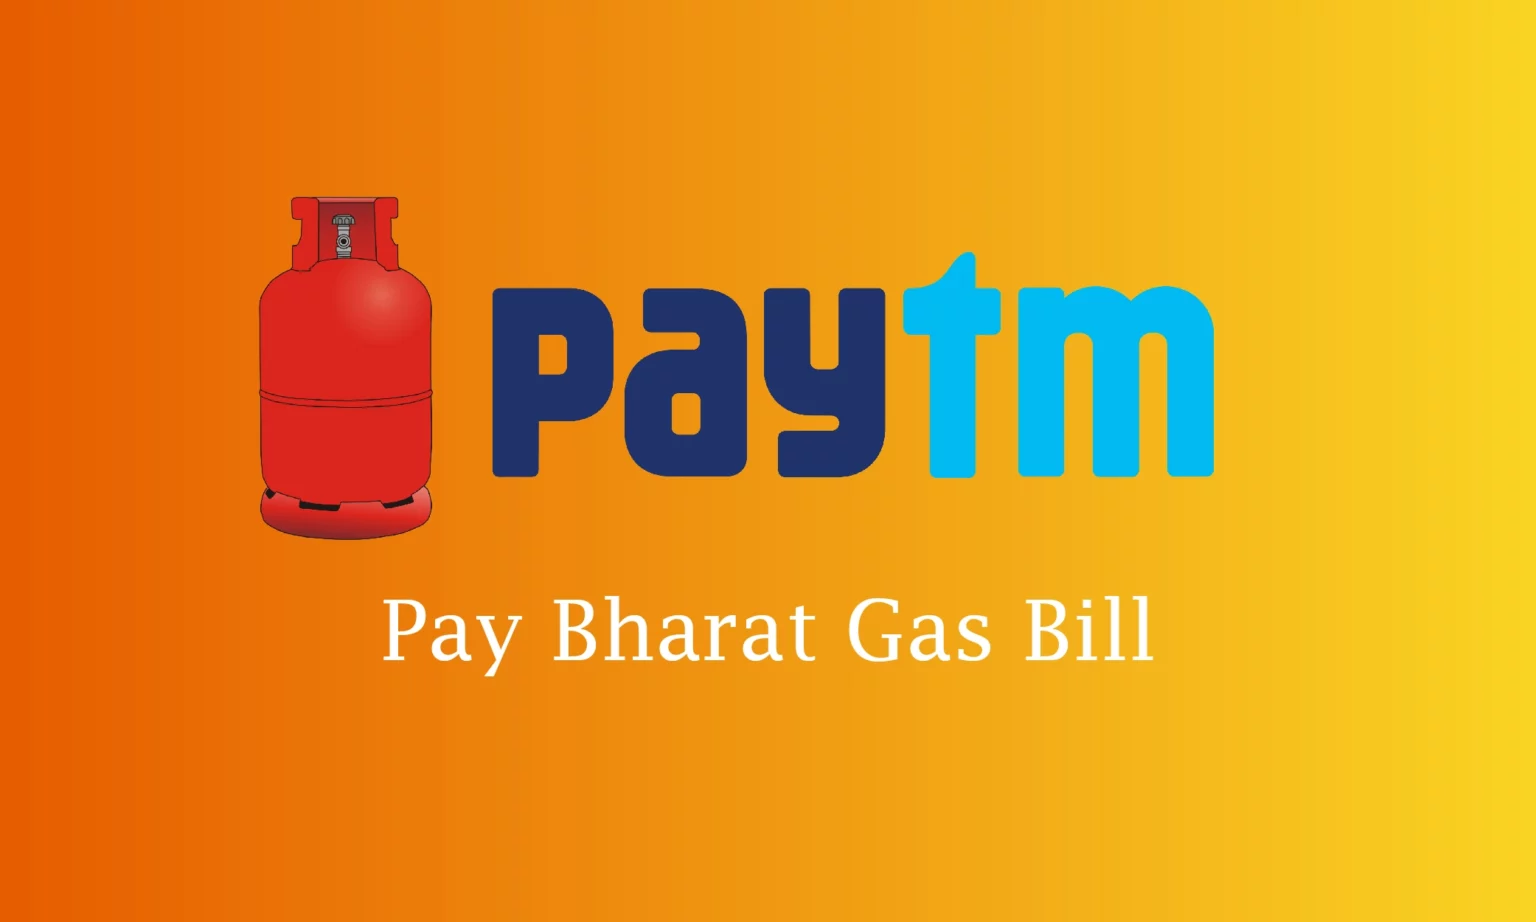 How to Pay Bharat Gas Bill on Paytm